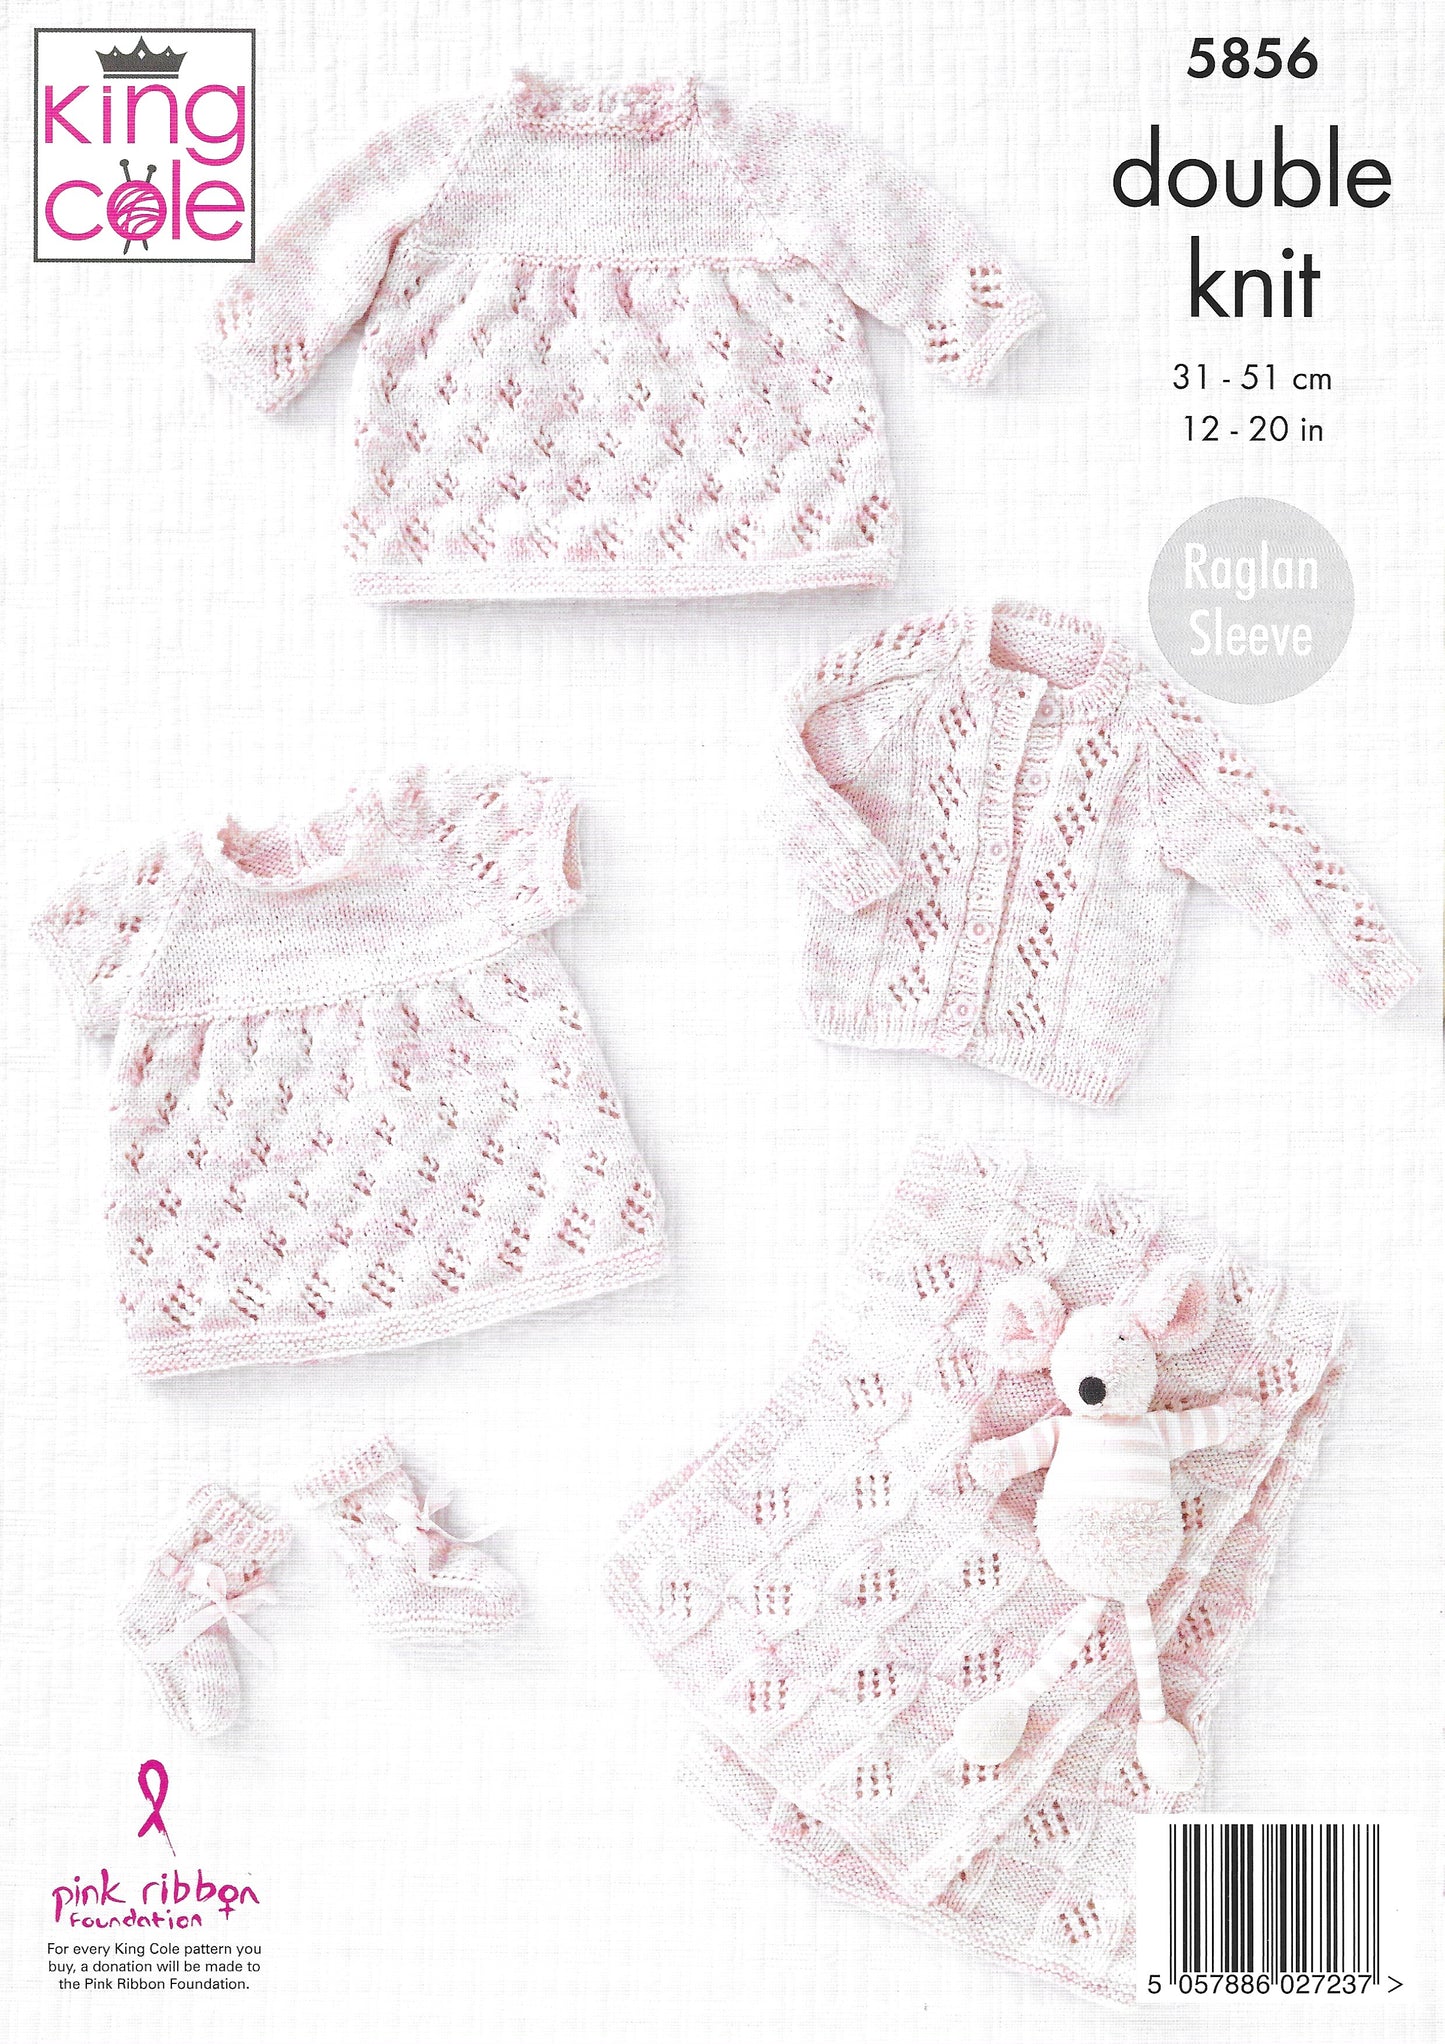 King Cole 5856 Dress Cardigan Blanket and Bootees Raglan Sleeve Double Knitting Pattern